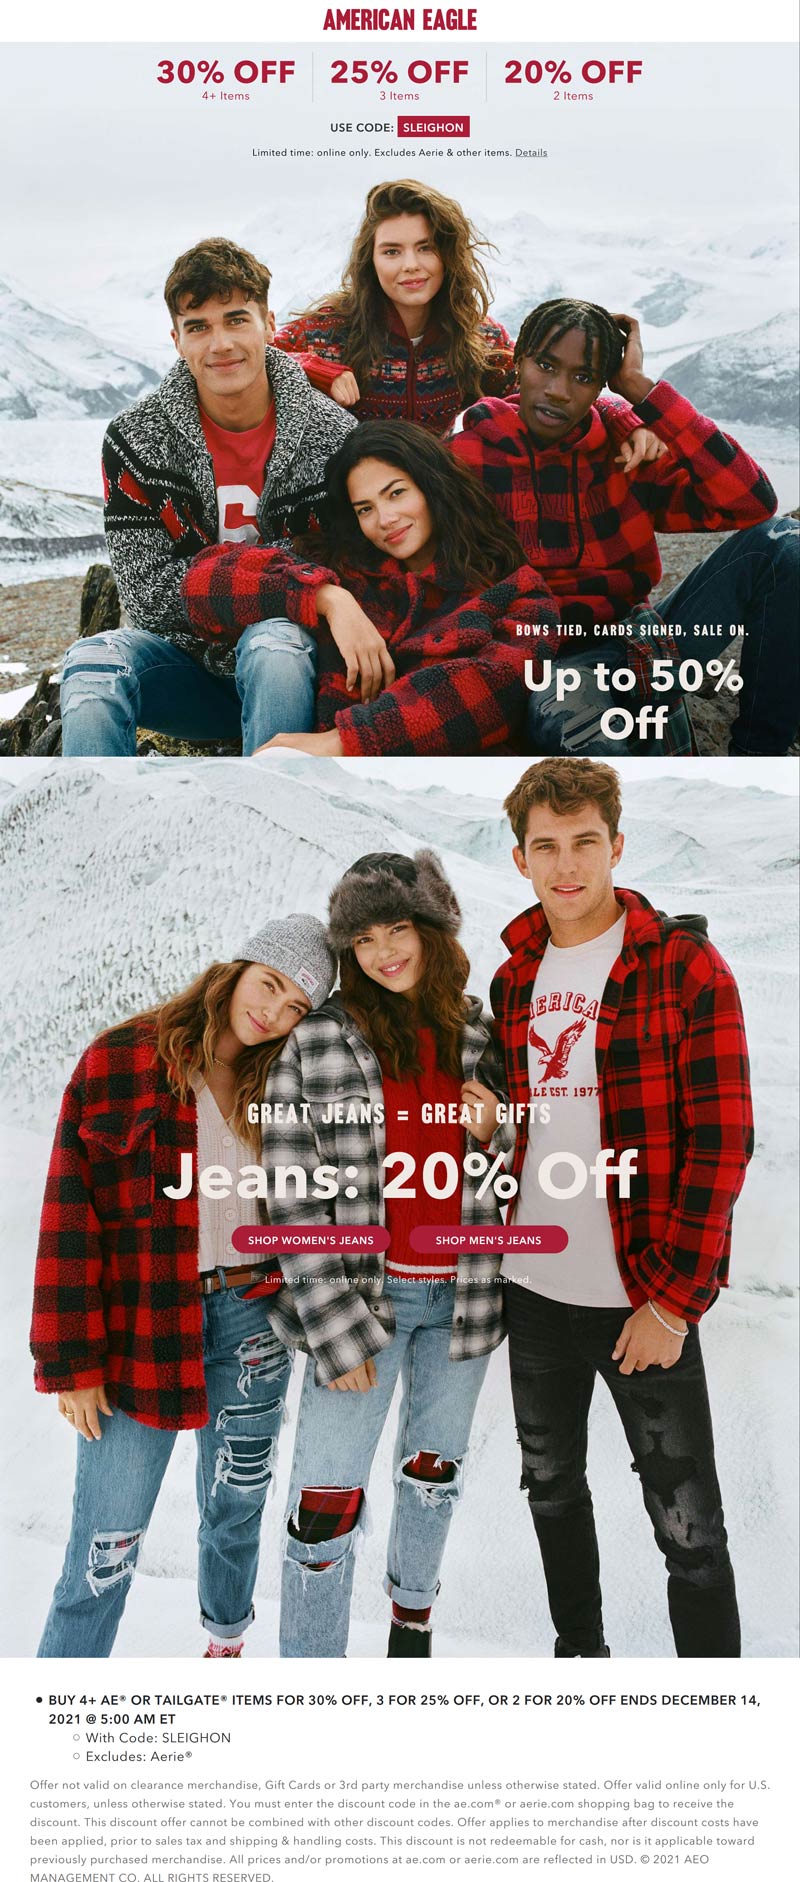 American Eagle stores Coupon  20-30% off 2+ items at American Eagle via promo code SLEIGHON #americaneagle 